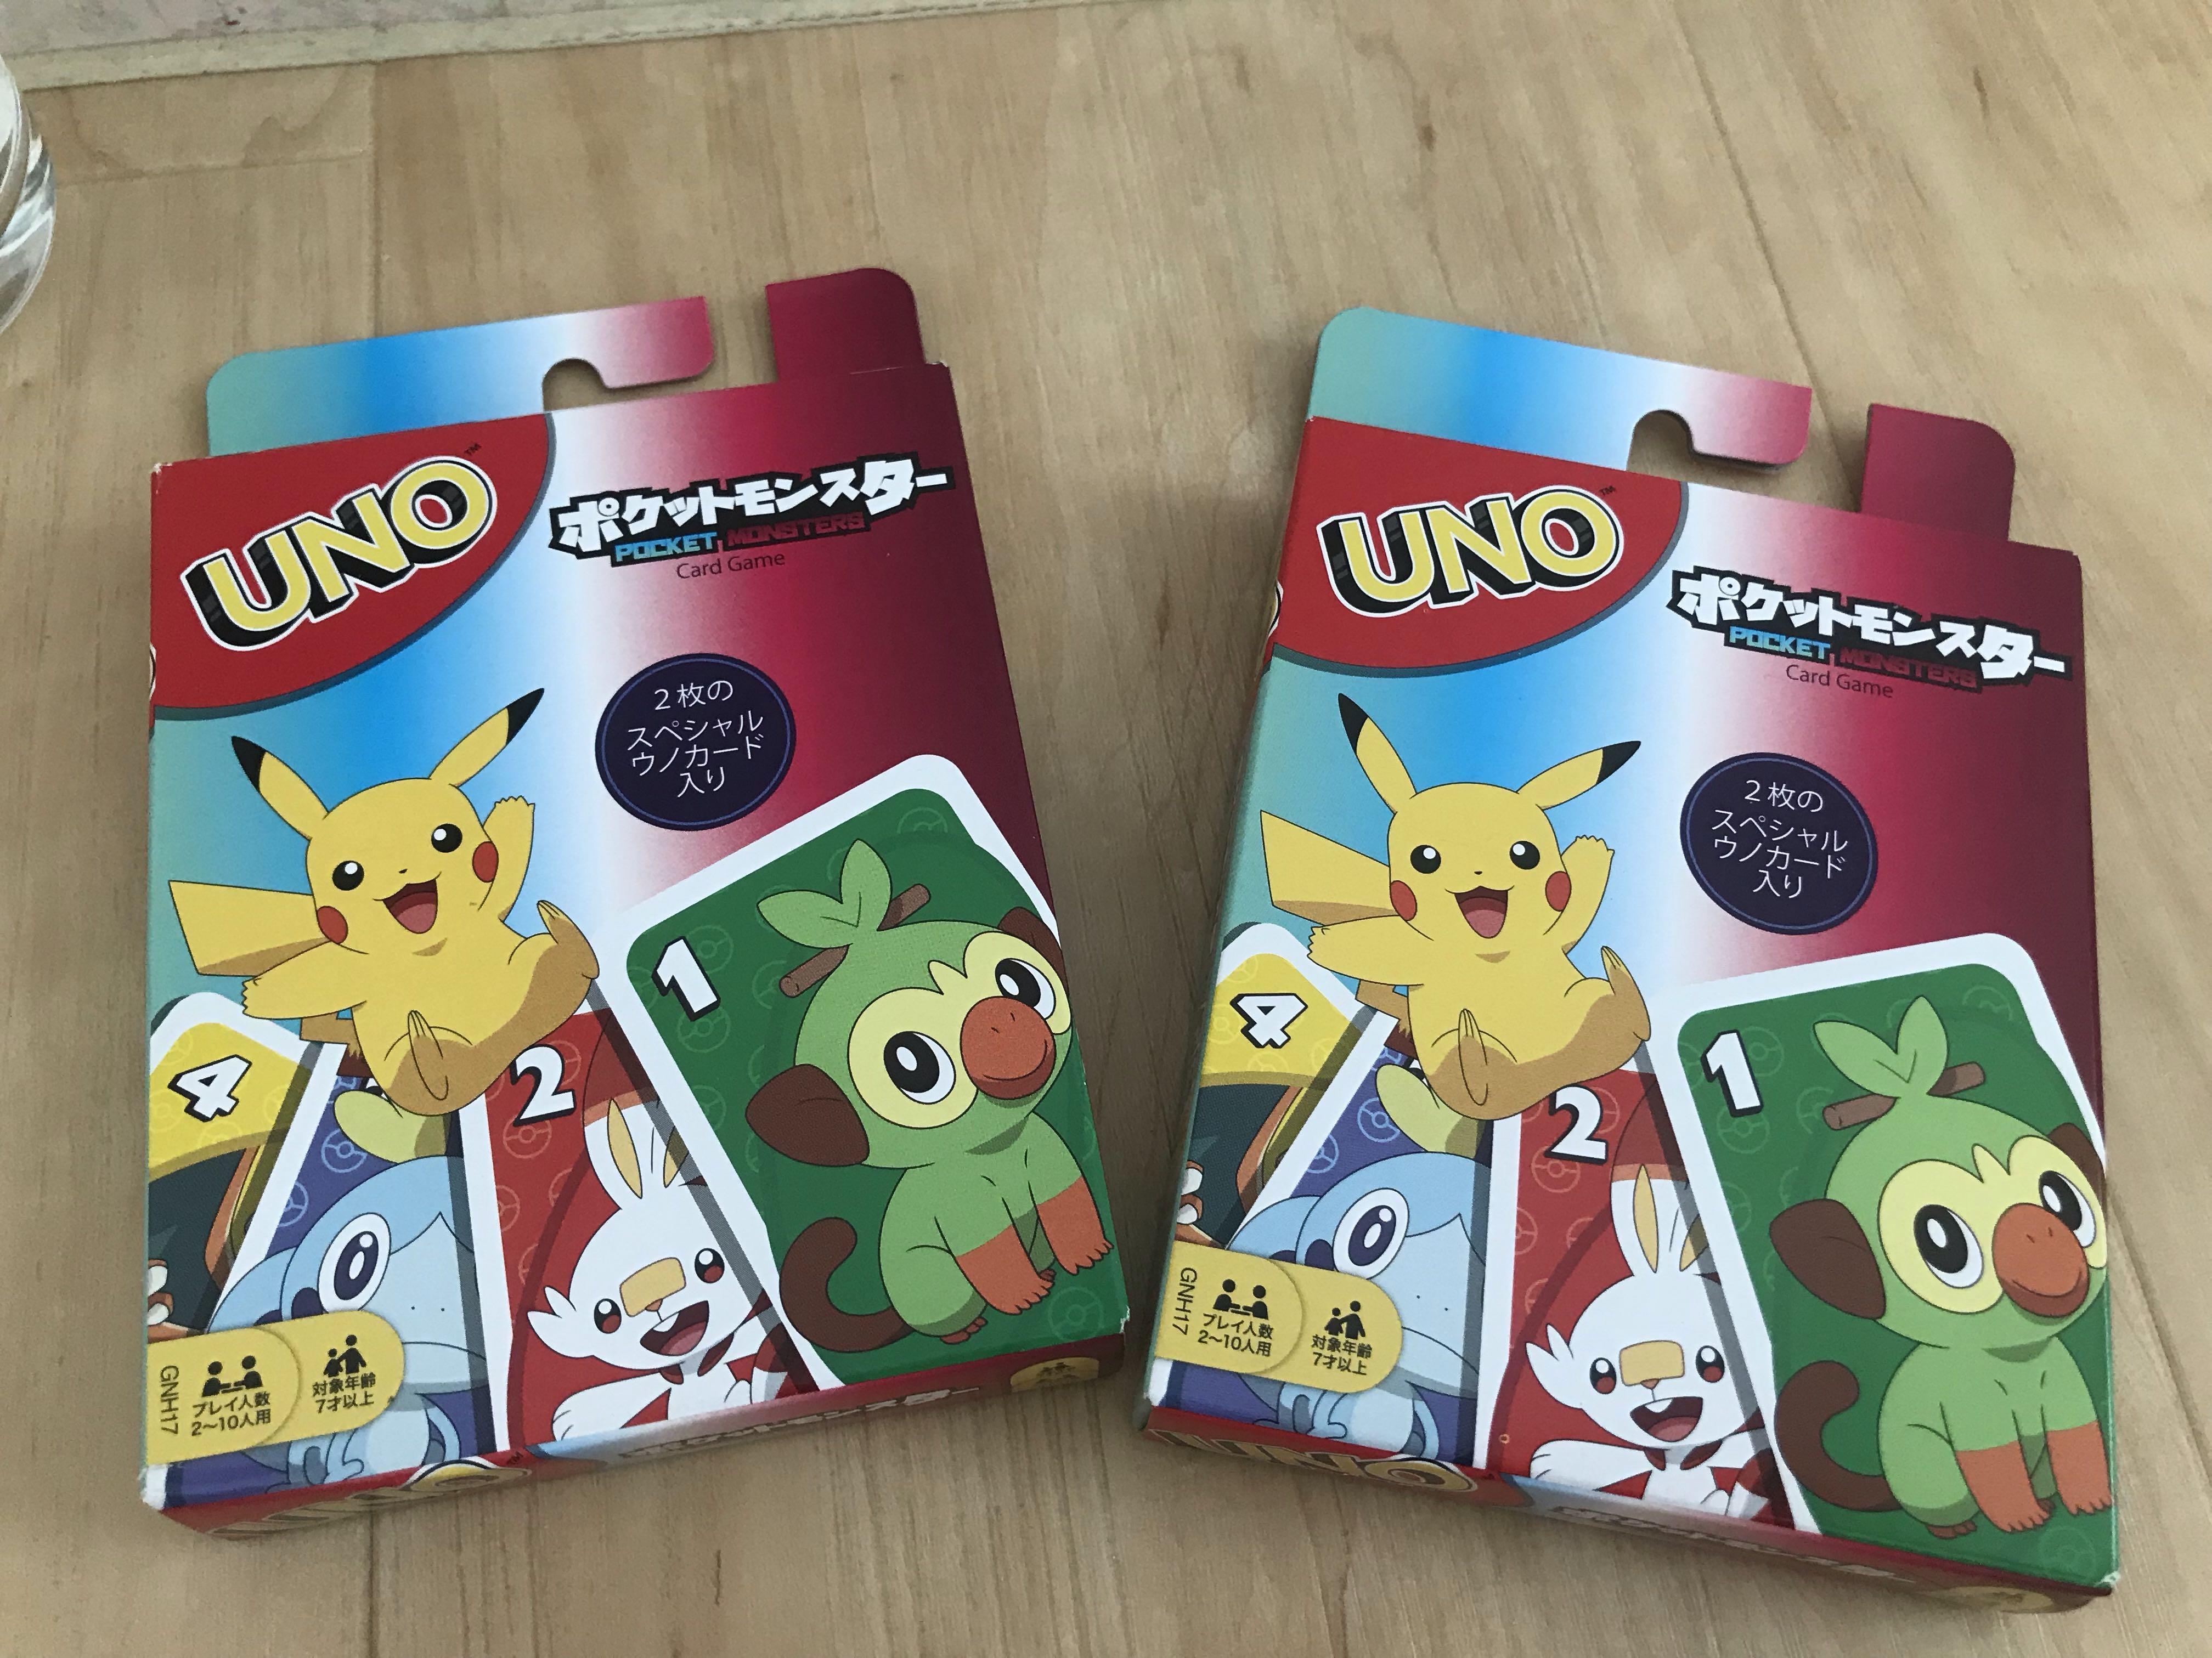 Pokemon Uno Newly Released On Jan At Japan Toys Games Others On Carousell